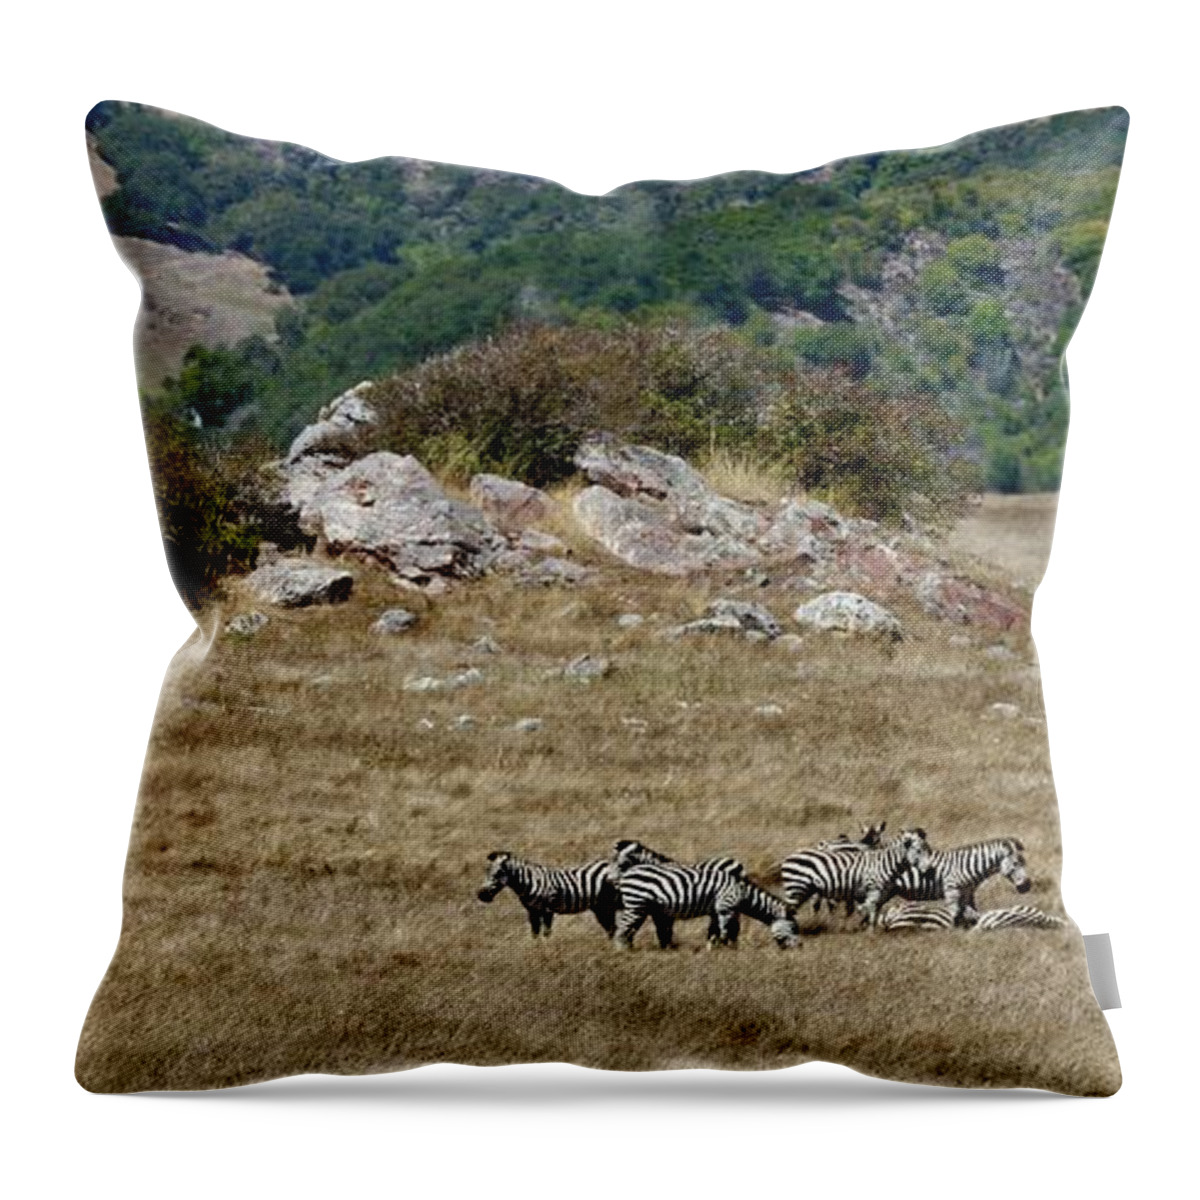 Zebras Throw Pillow featuring the photograph Hearst Castle Zebras by Tap On Photo